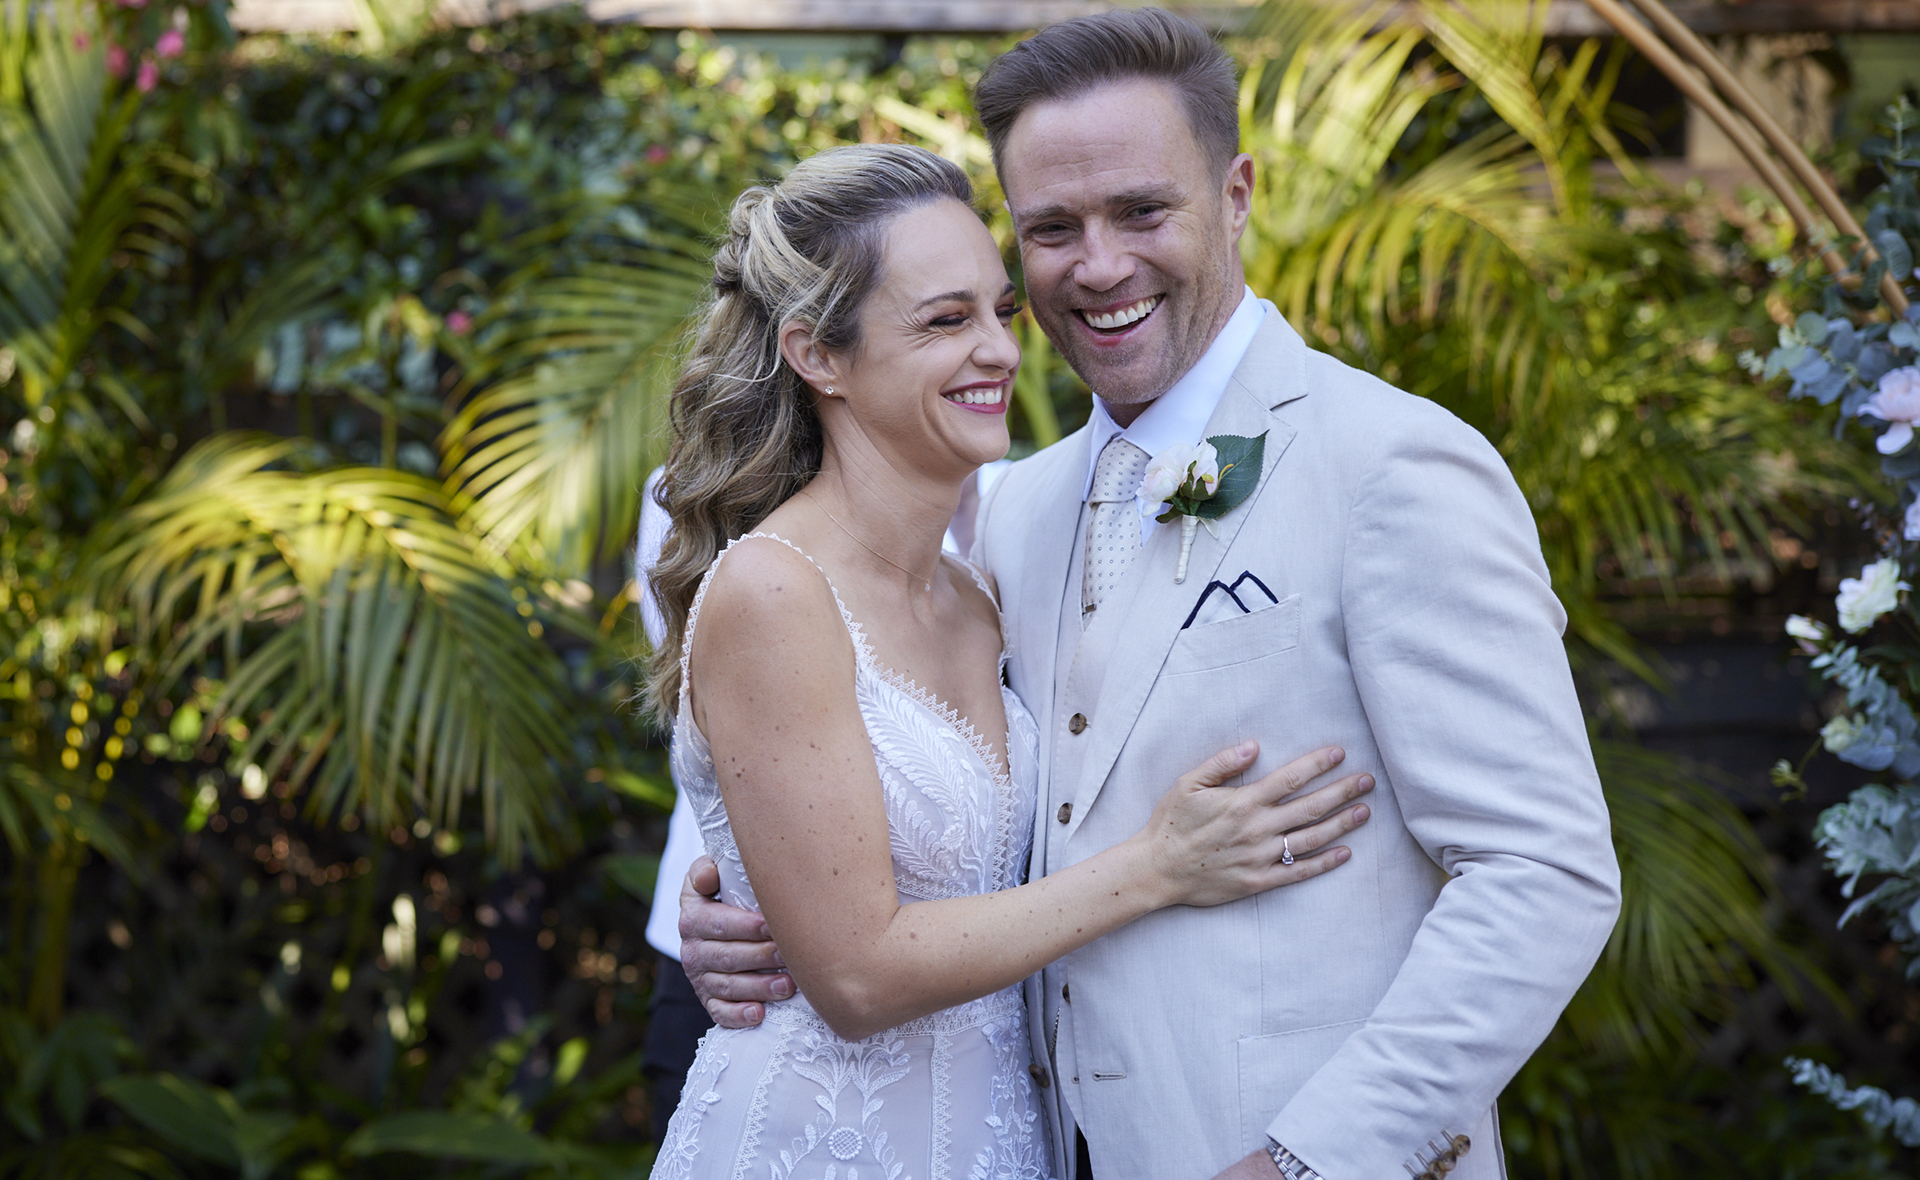 Home and Away wedding bells! Tori and Christian finally tie the knot